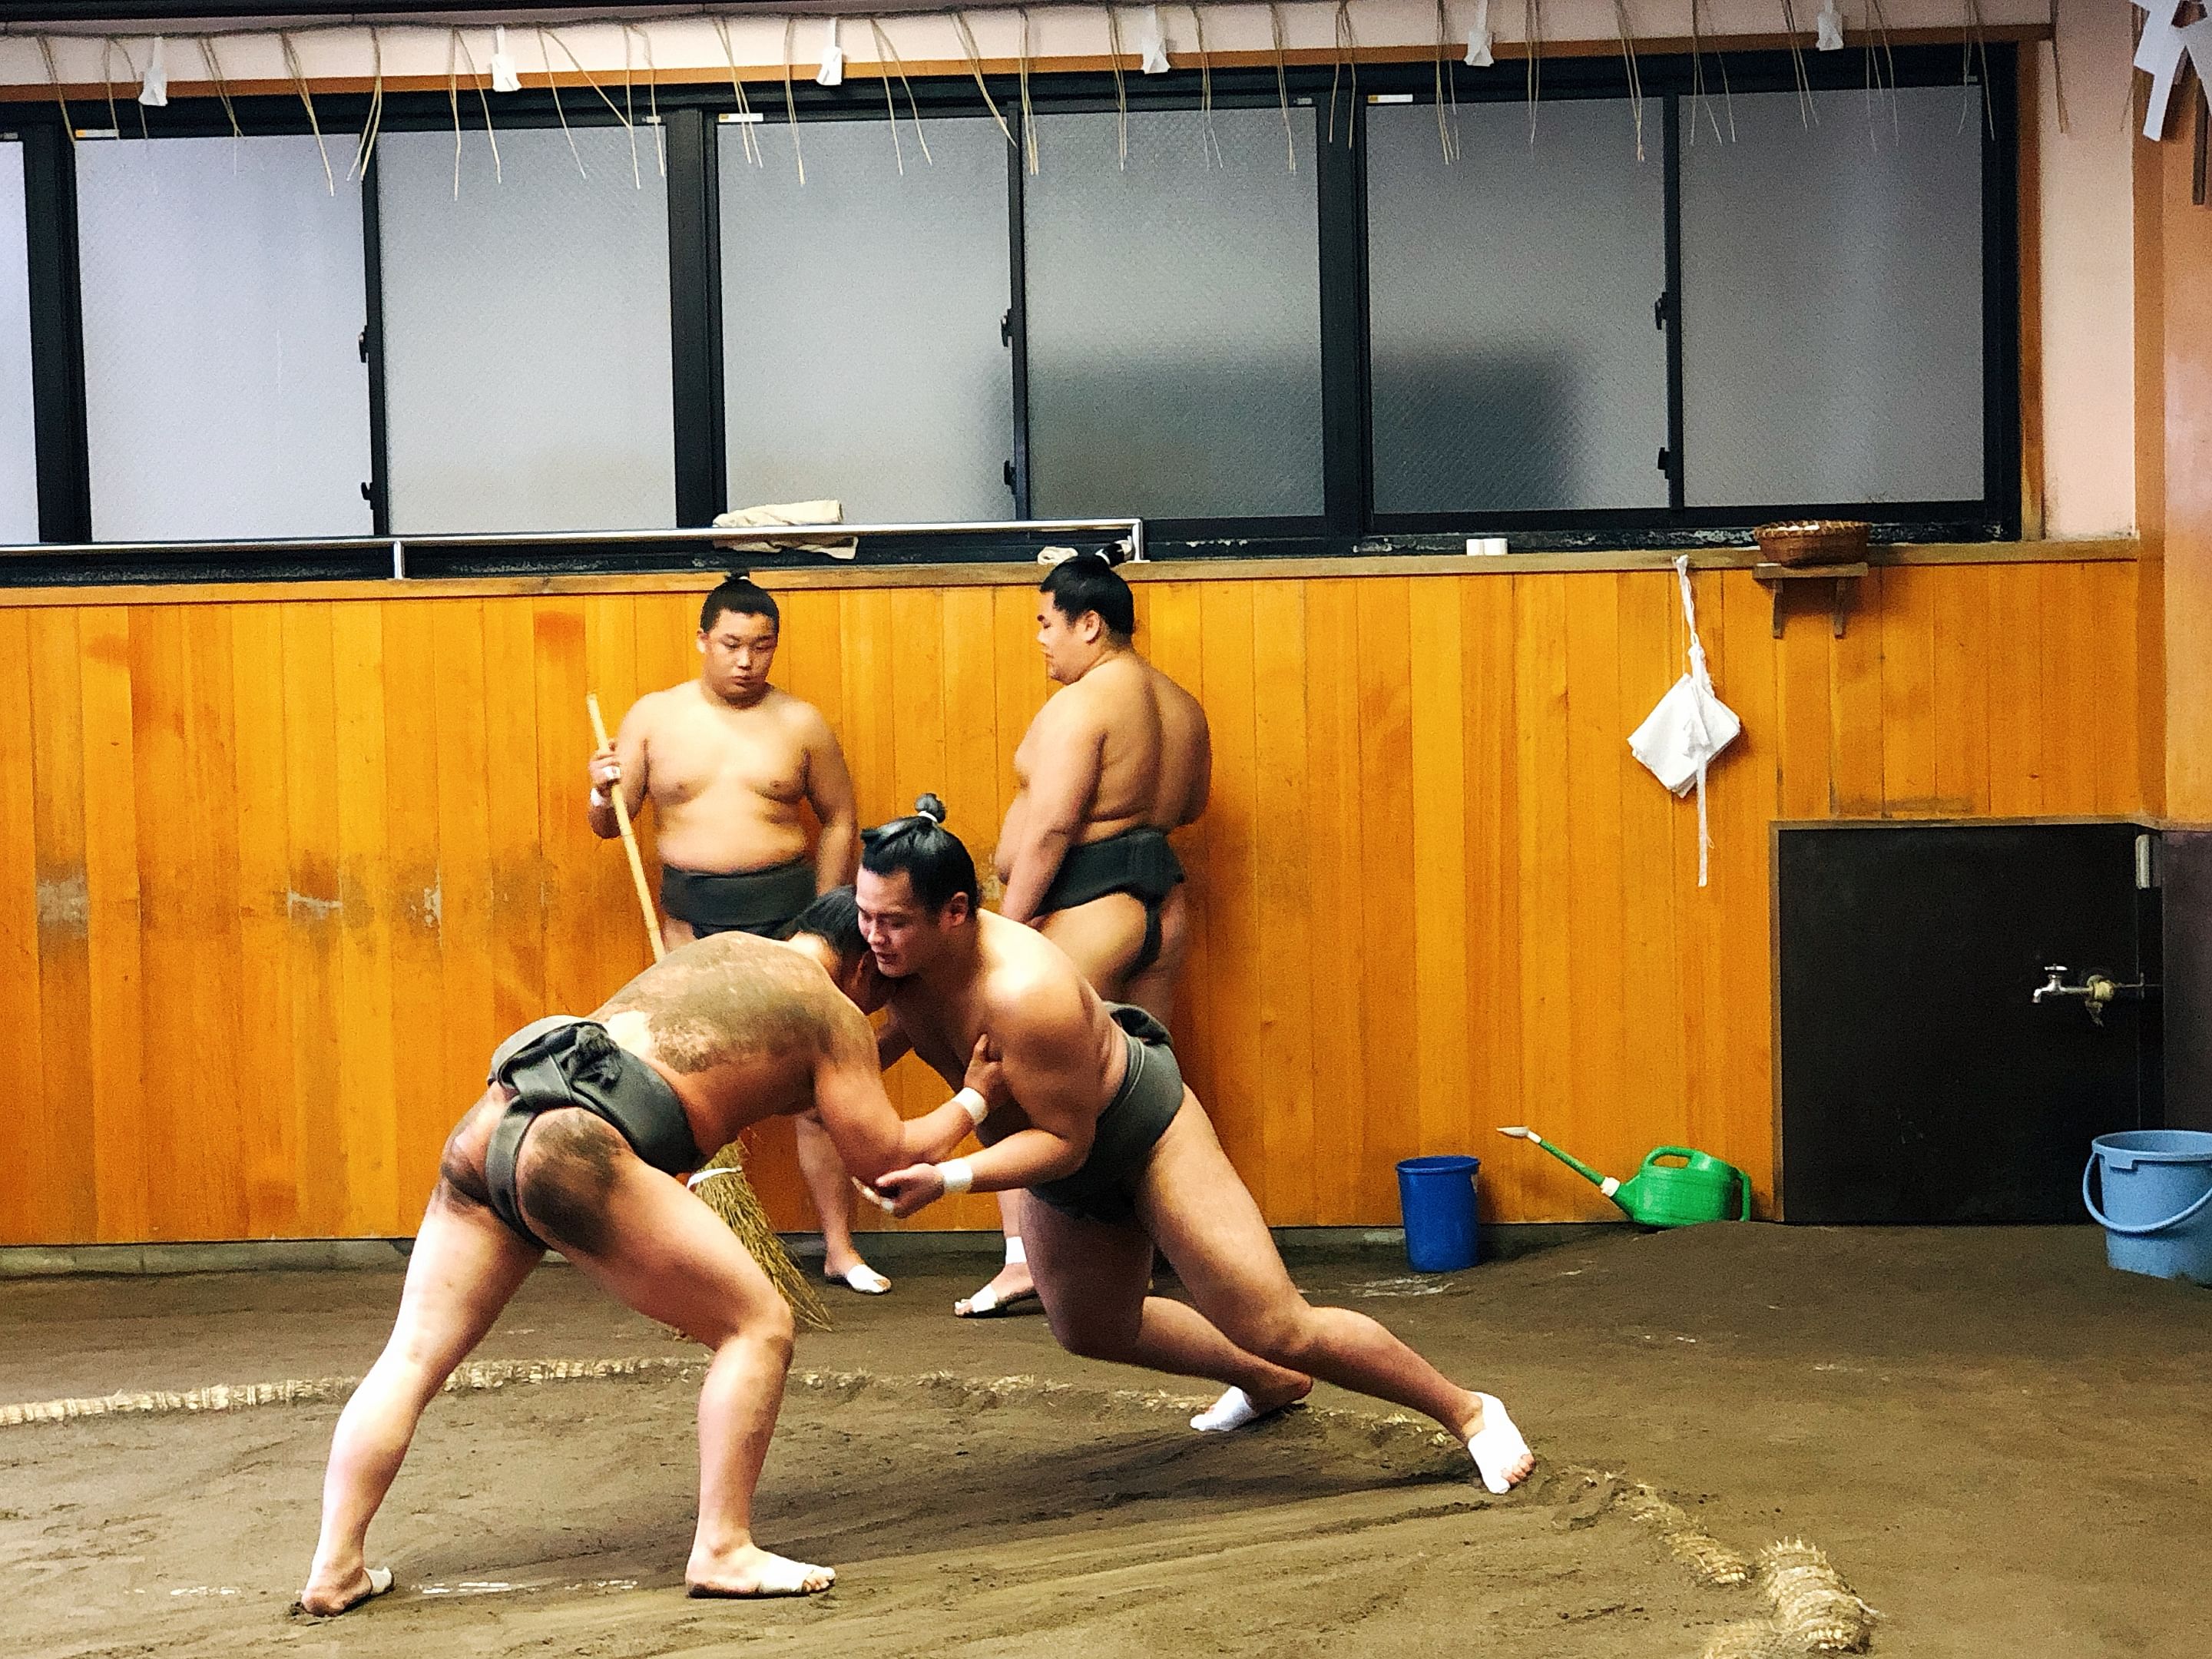 Watch Morning Practice at a Sumo Stable in Tokyo